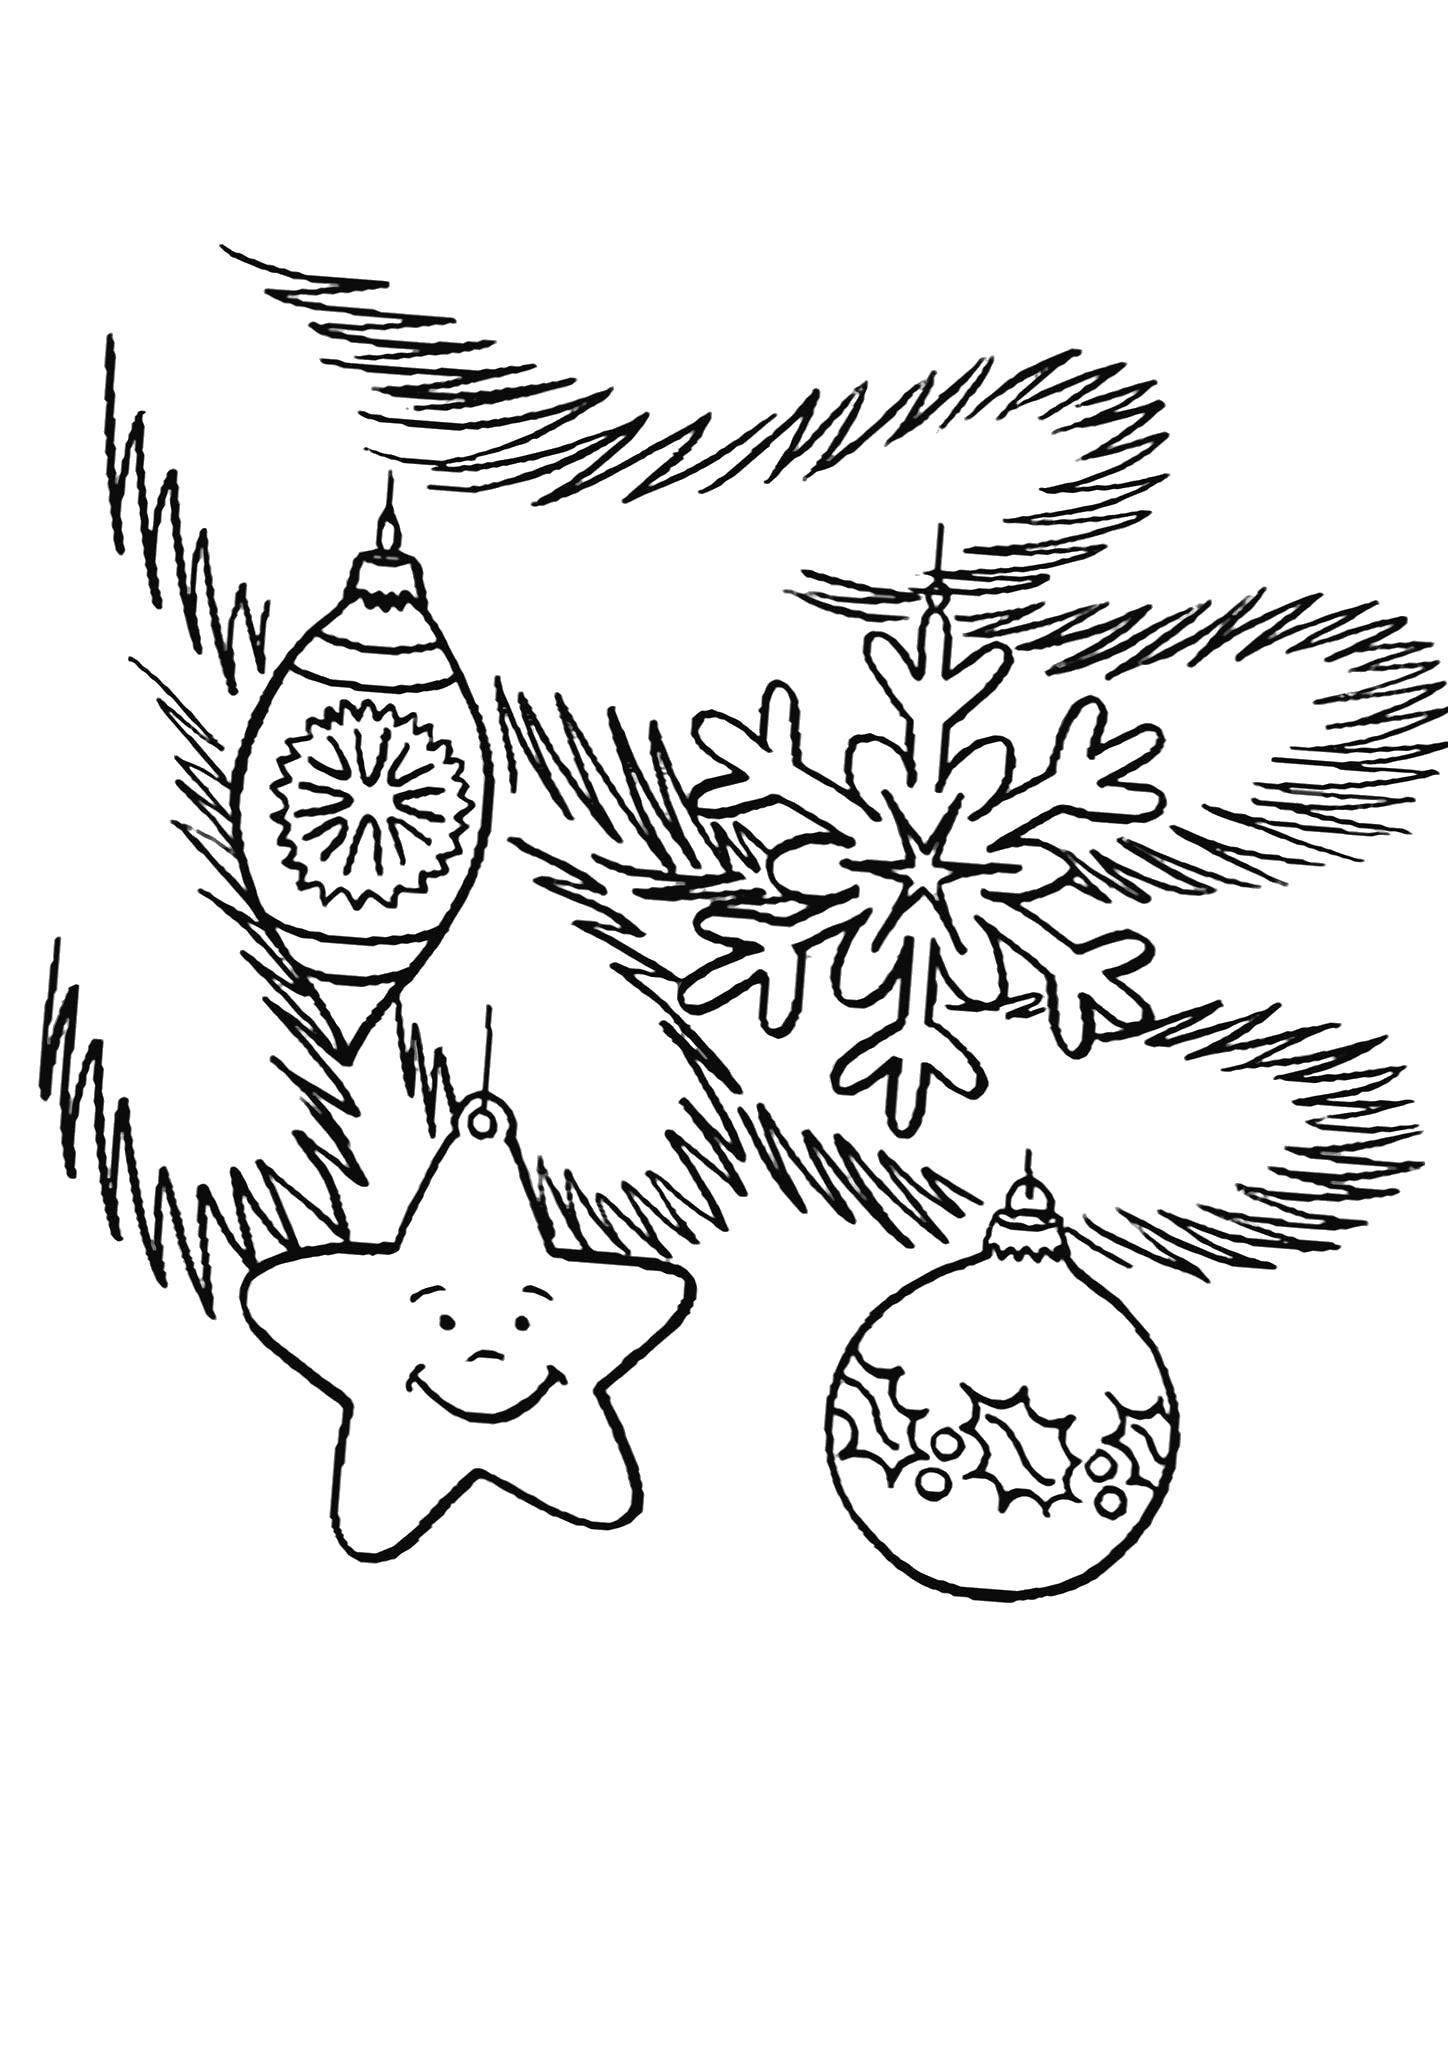 Coloring Christmas decorations. Category new year. Tags:  New Year, Christmas toy.